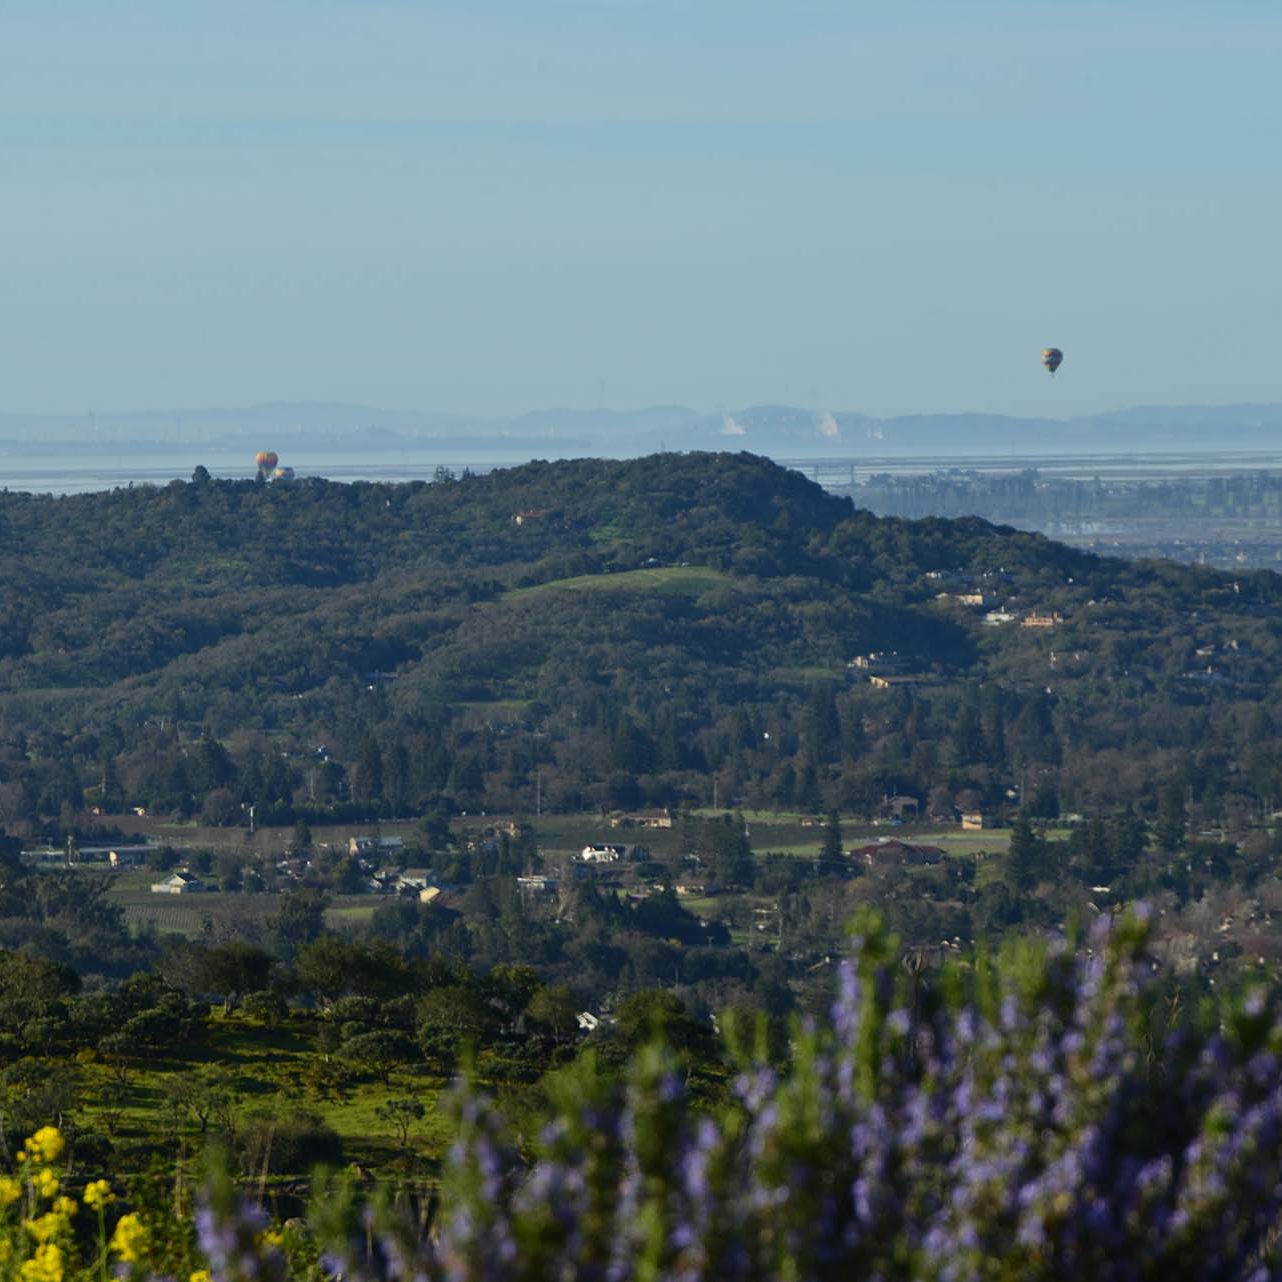 photo from vineyard of lavender and flowers in foreground, hot air balloon and bay in the background